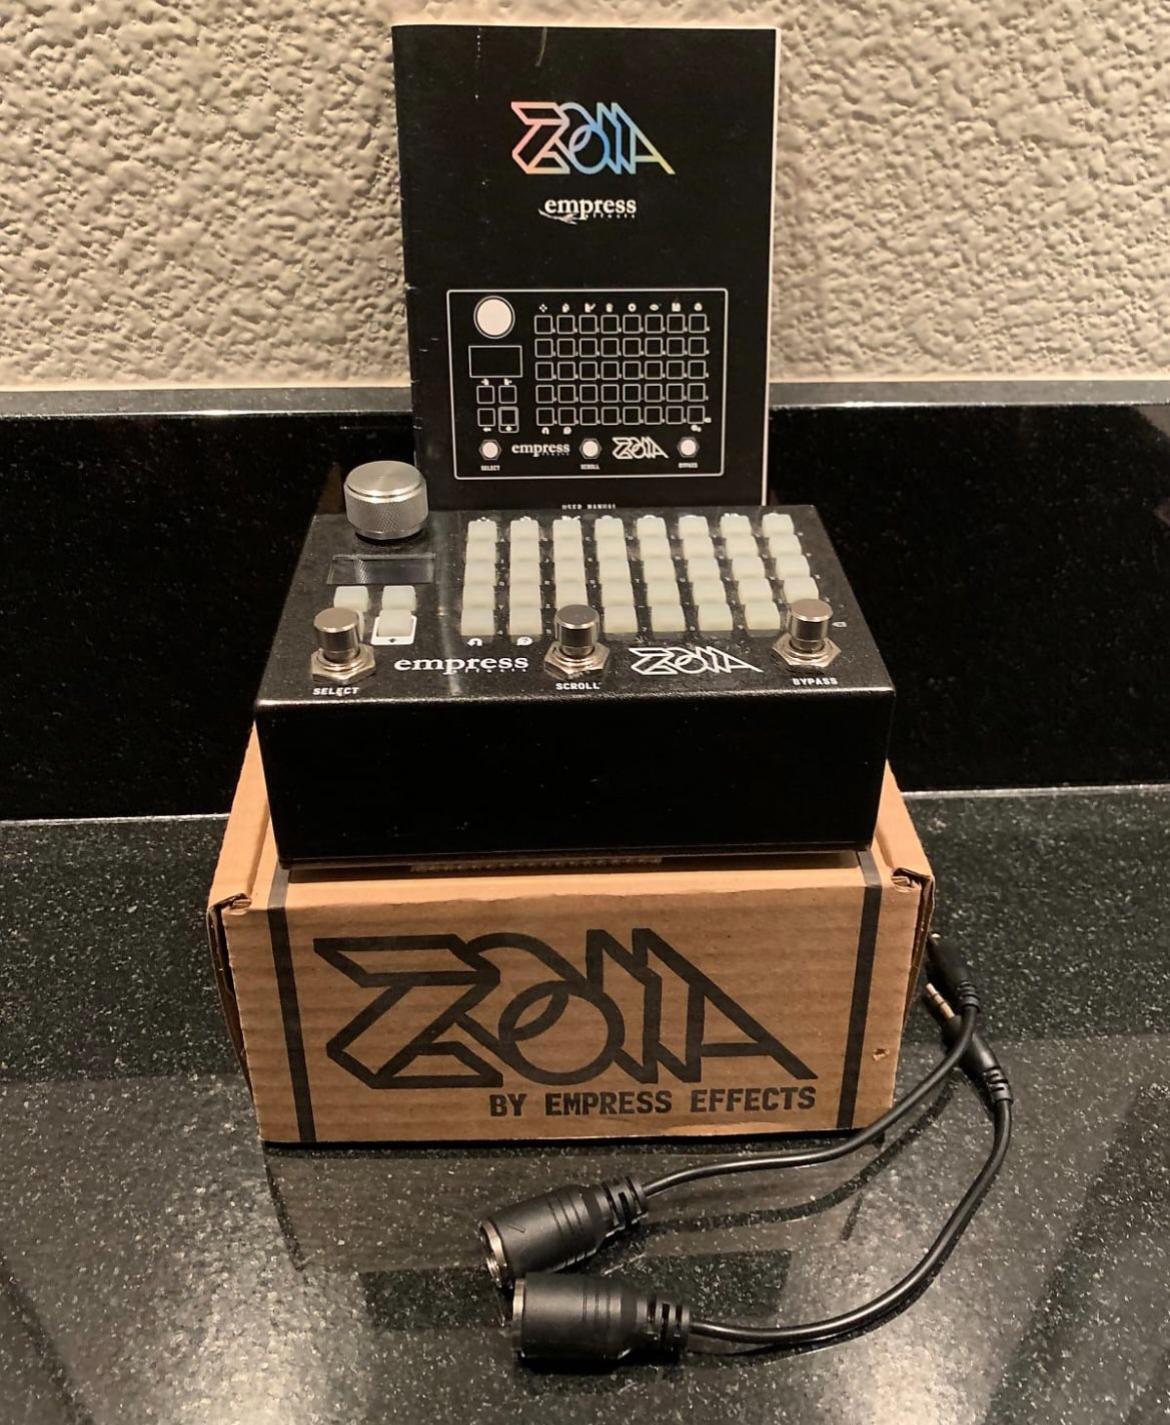 Used Empress Effects ZOIA Modular - Sweetwater's Gear Exchange